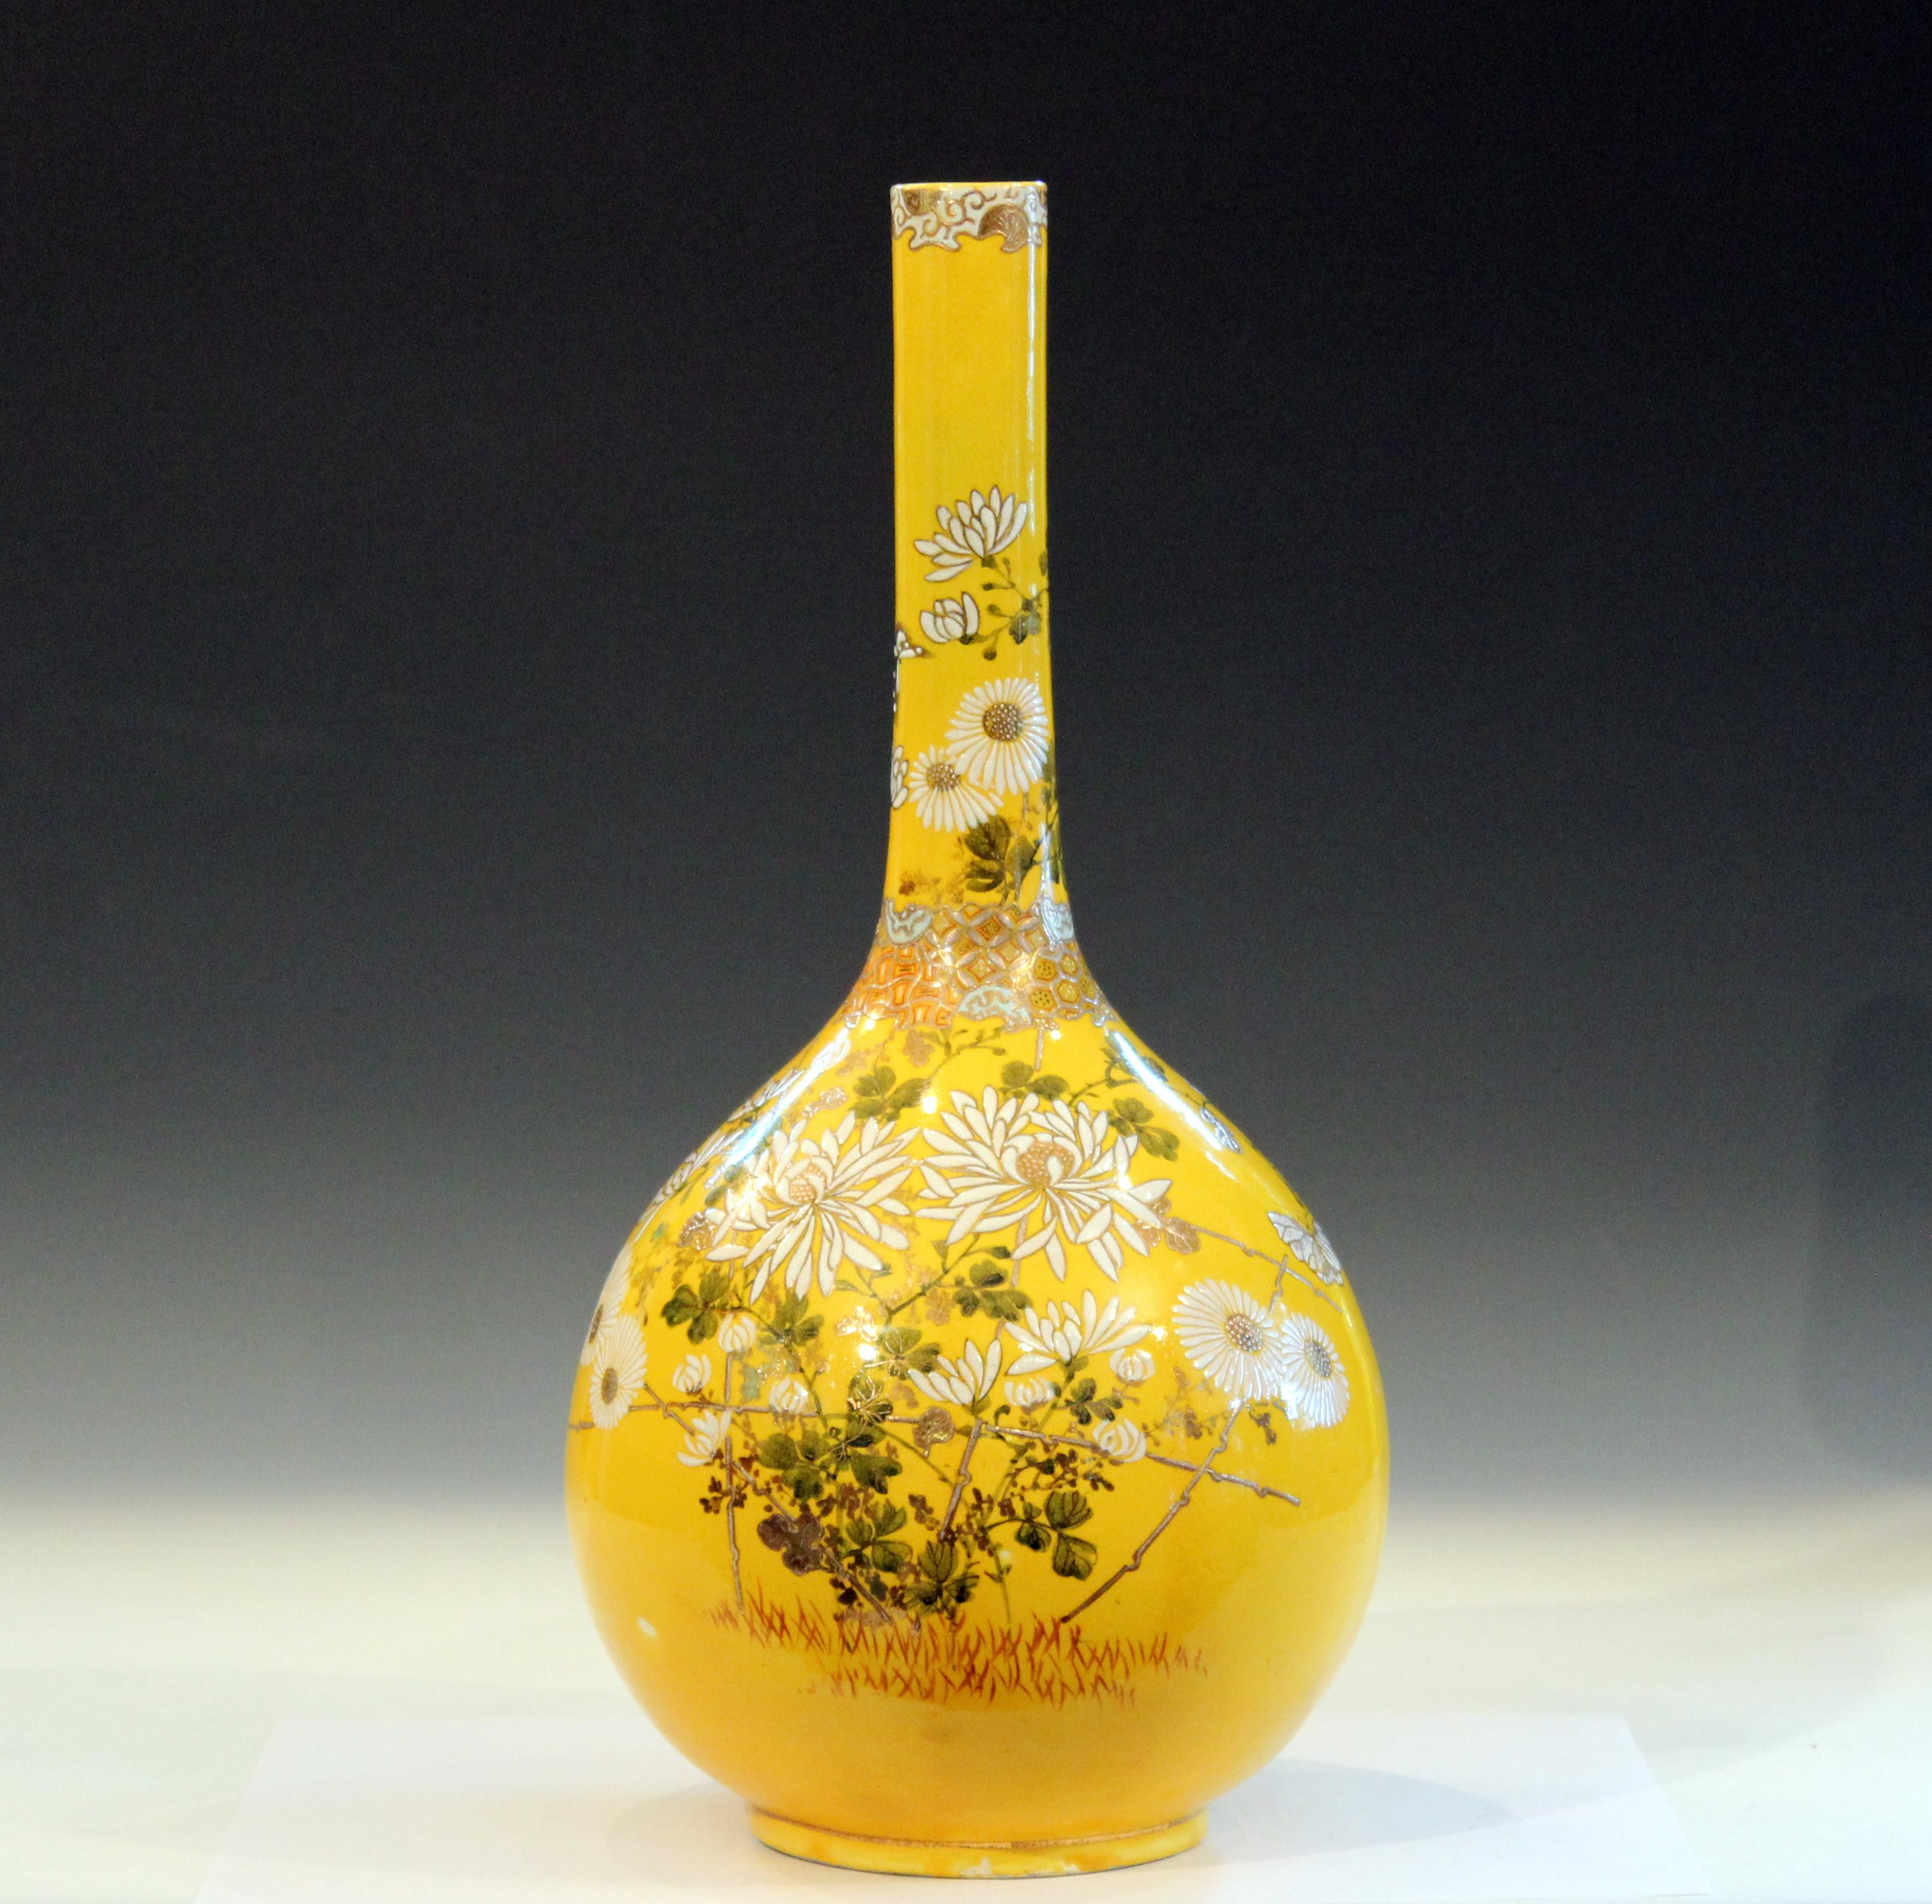 Antique Kyoto Satsuma pottery vase, attributed to the Kinkozan Pottery, with brightly enameled flowers and butterflies against an atomic yellow ground, circa 1910. Measures: 18